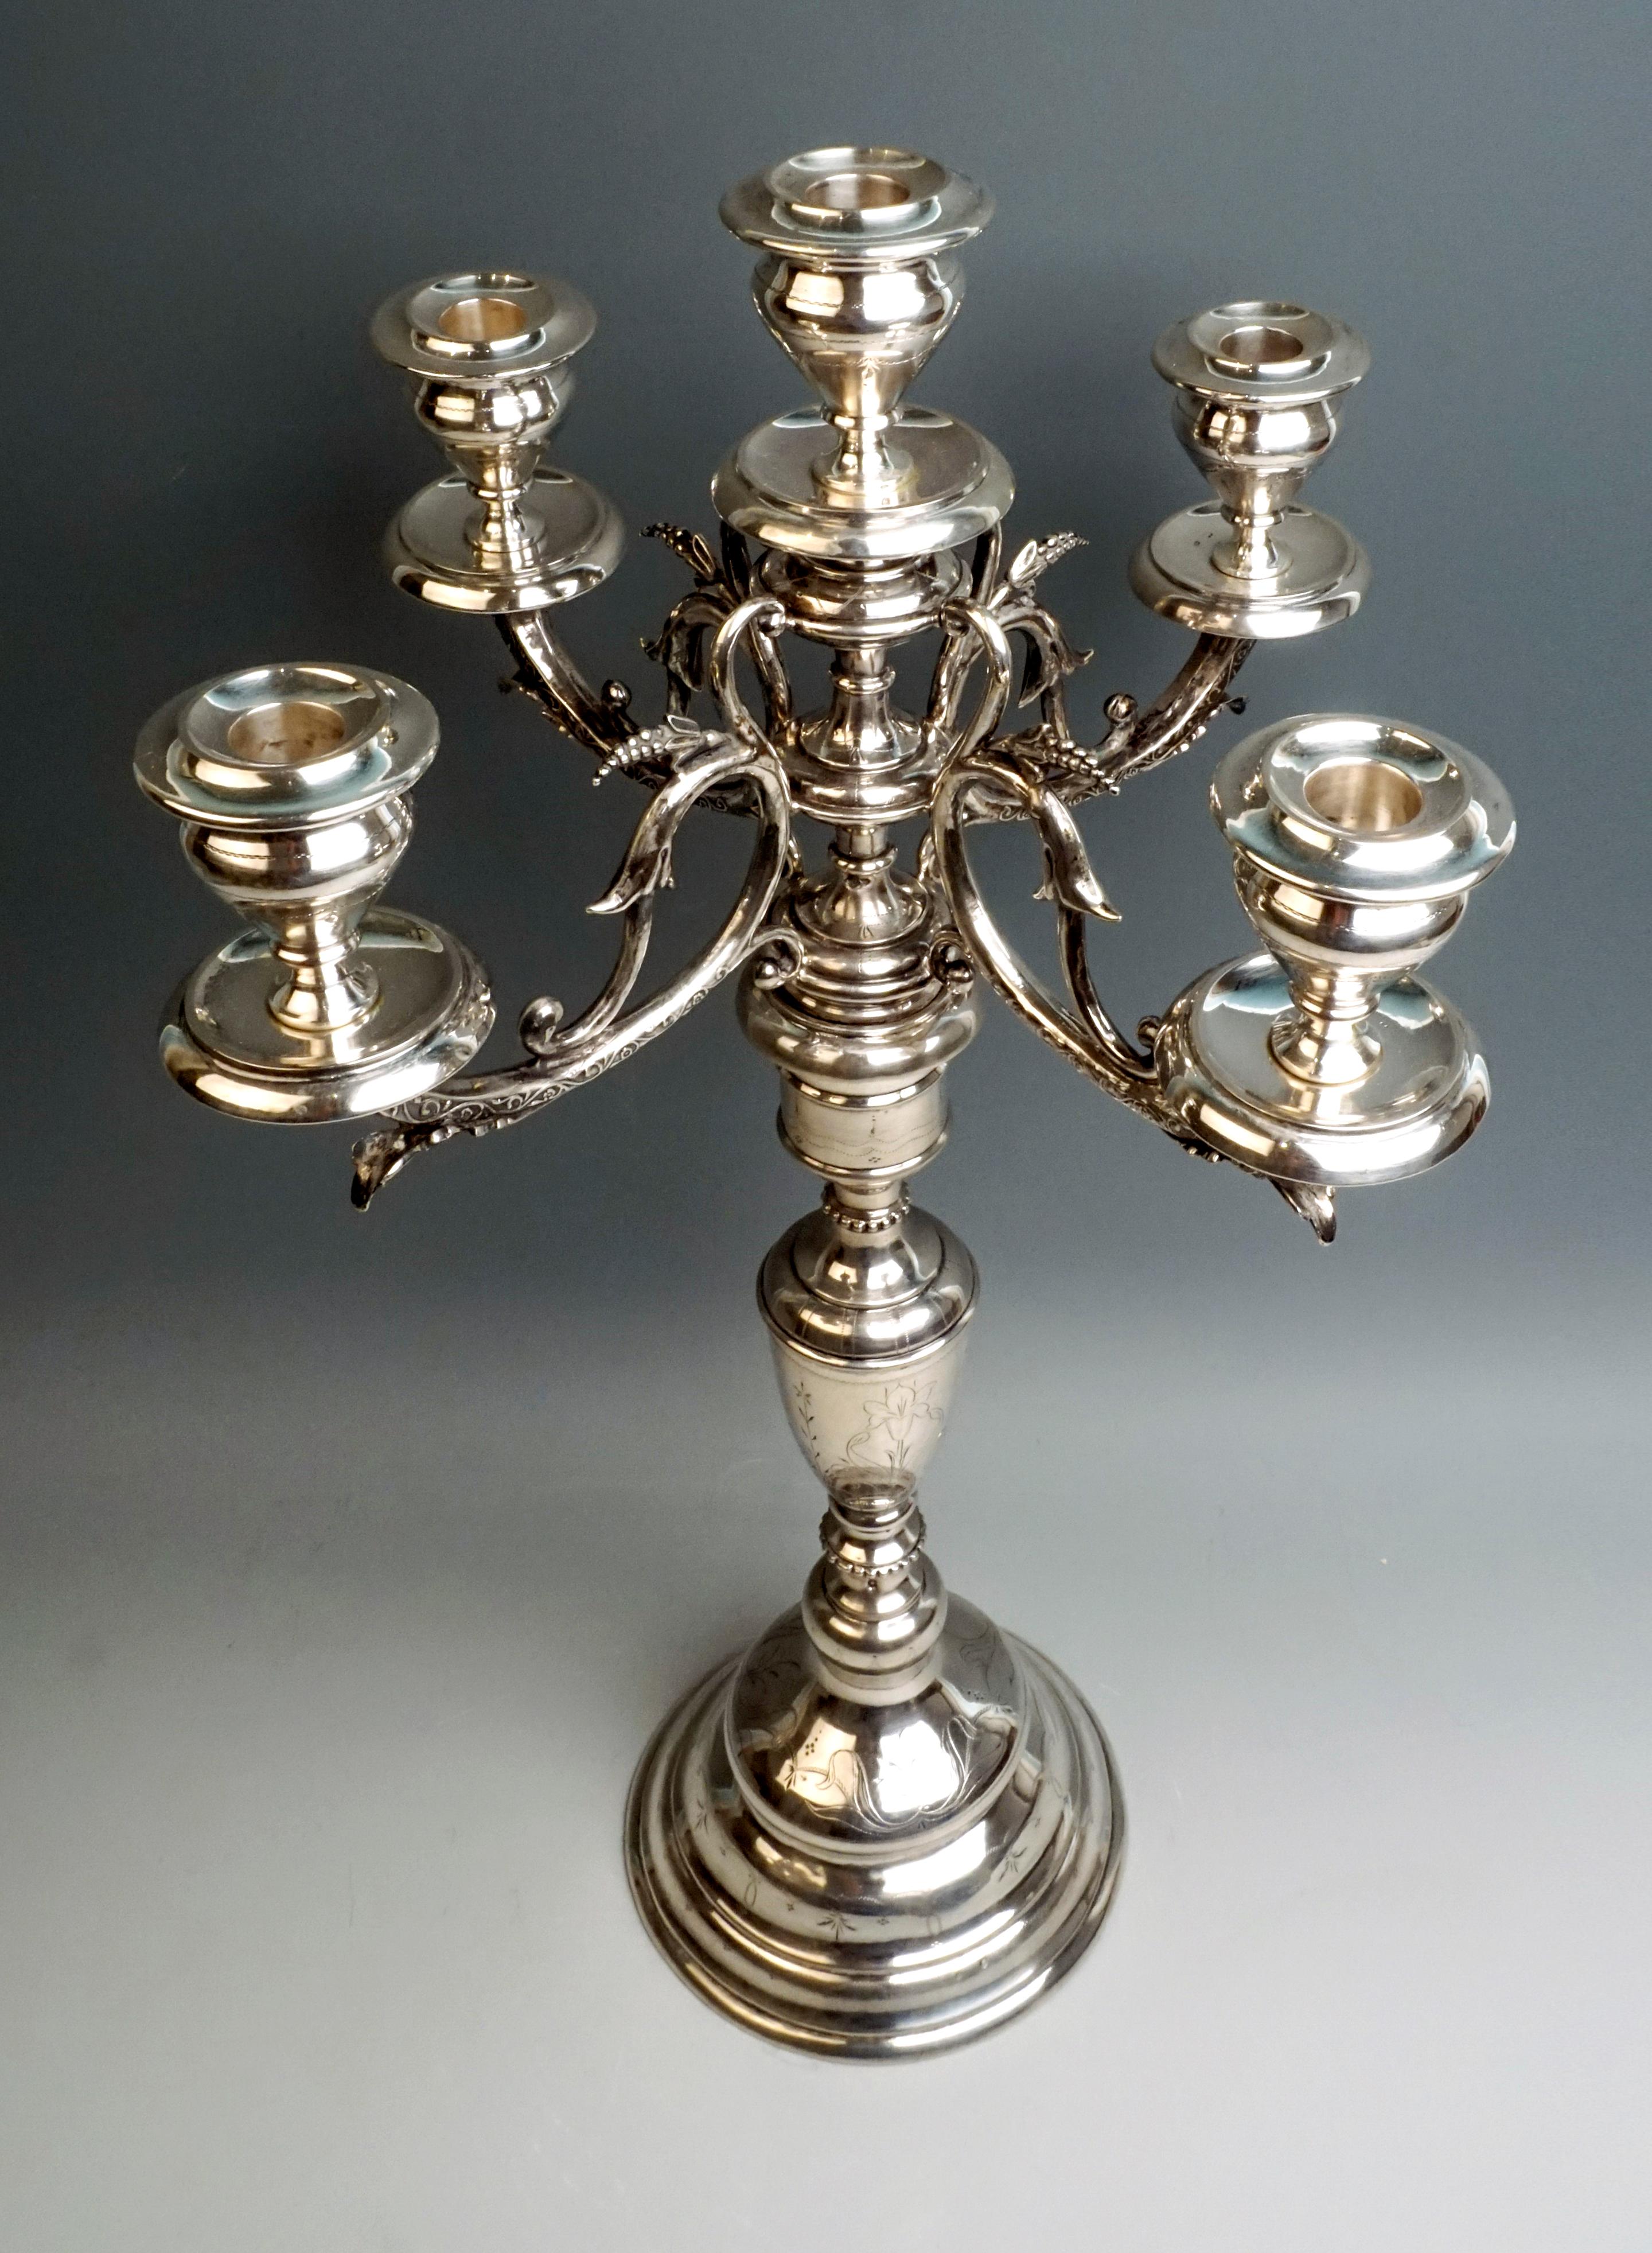 Decorative large five-light silver candelabra on a round base, with embossed and chased geometric and floral decor.

Finest work of simple elegance by the master Josef Kurzweil, active in Vienna from 1874-1912.

Made circa 1900
Branded by the